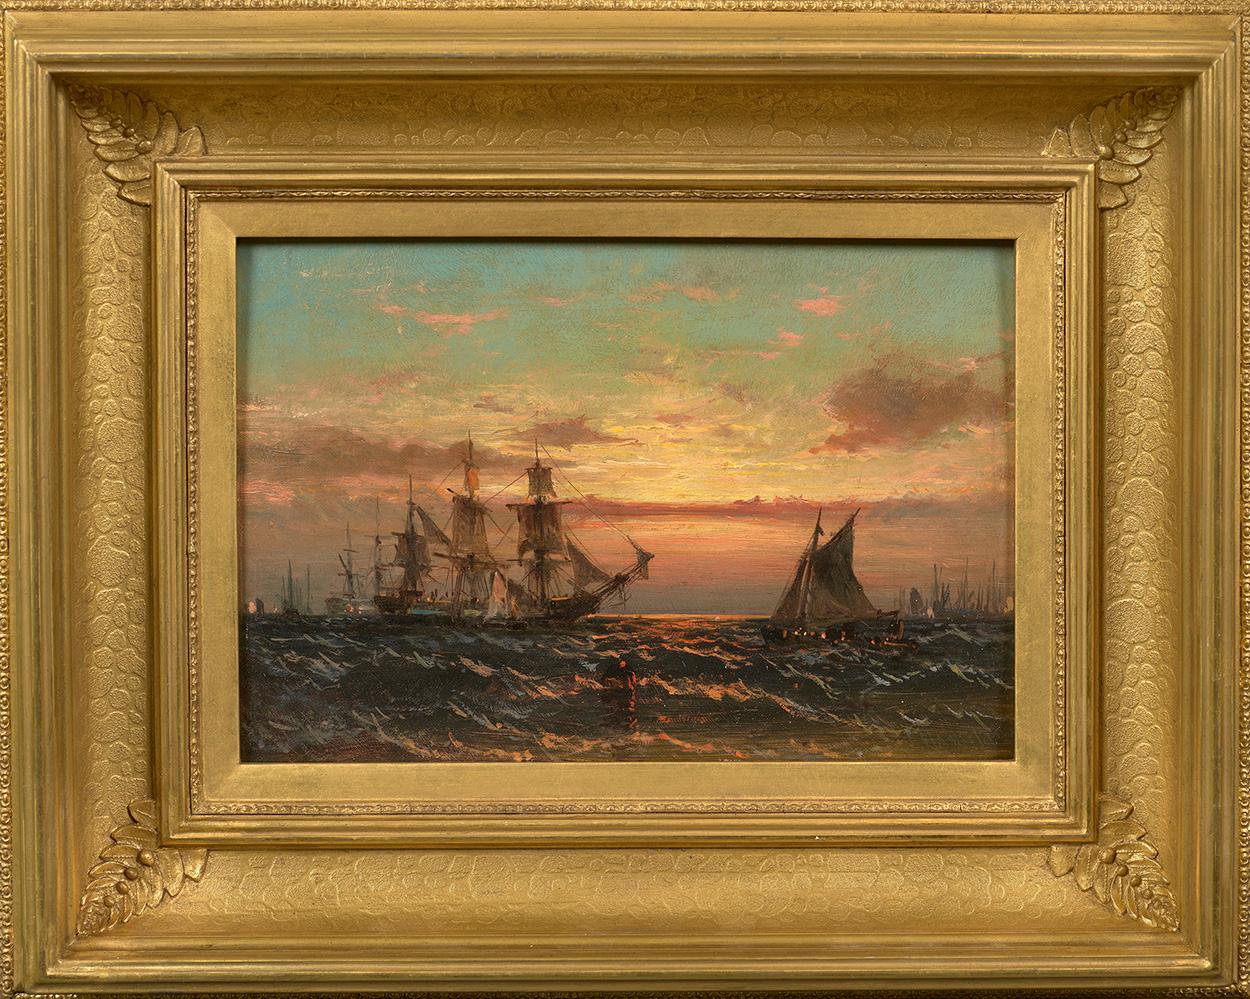 Coastal Scene at Sunset with Ships  - Painting by James Hamilton